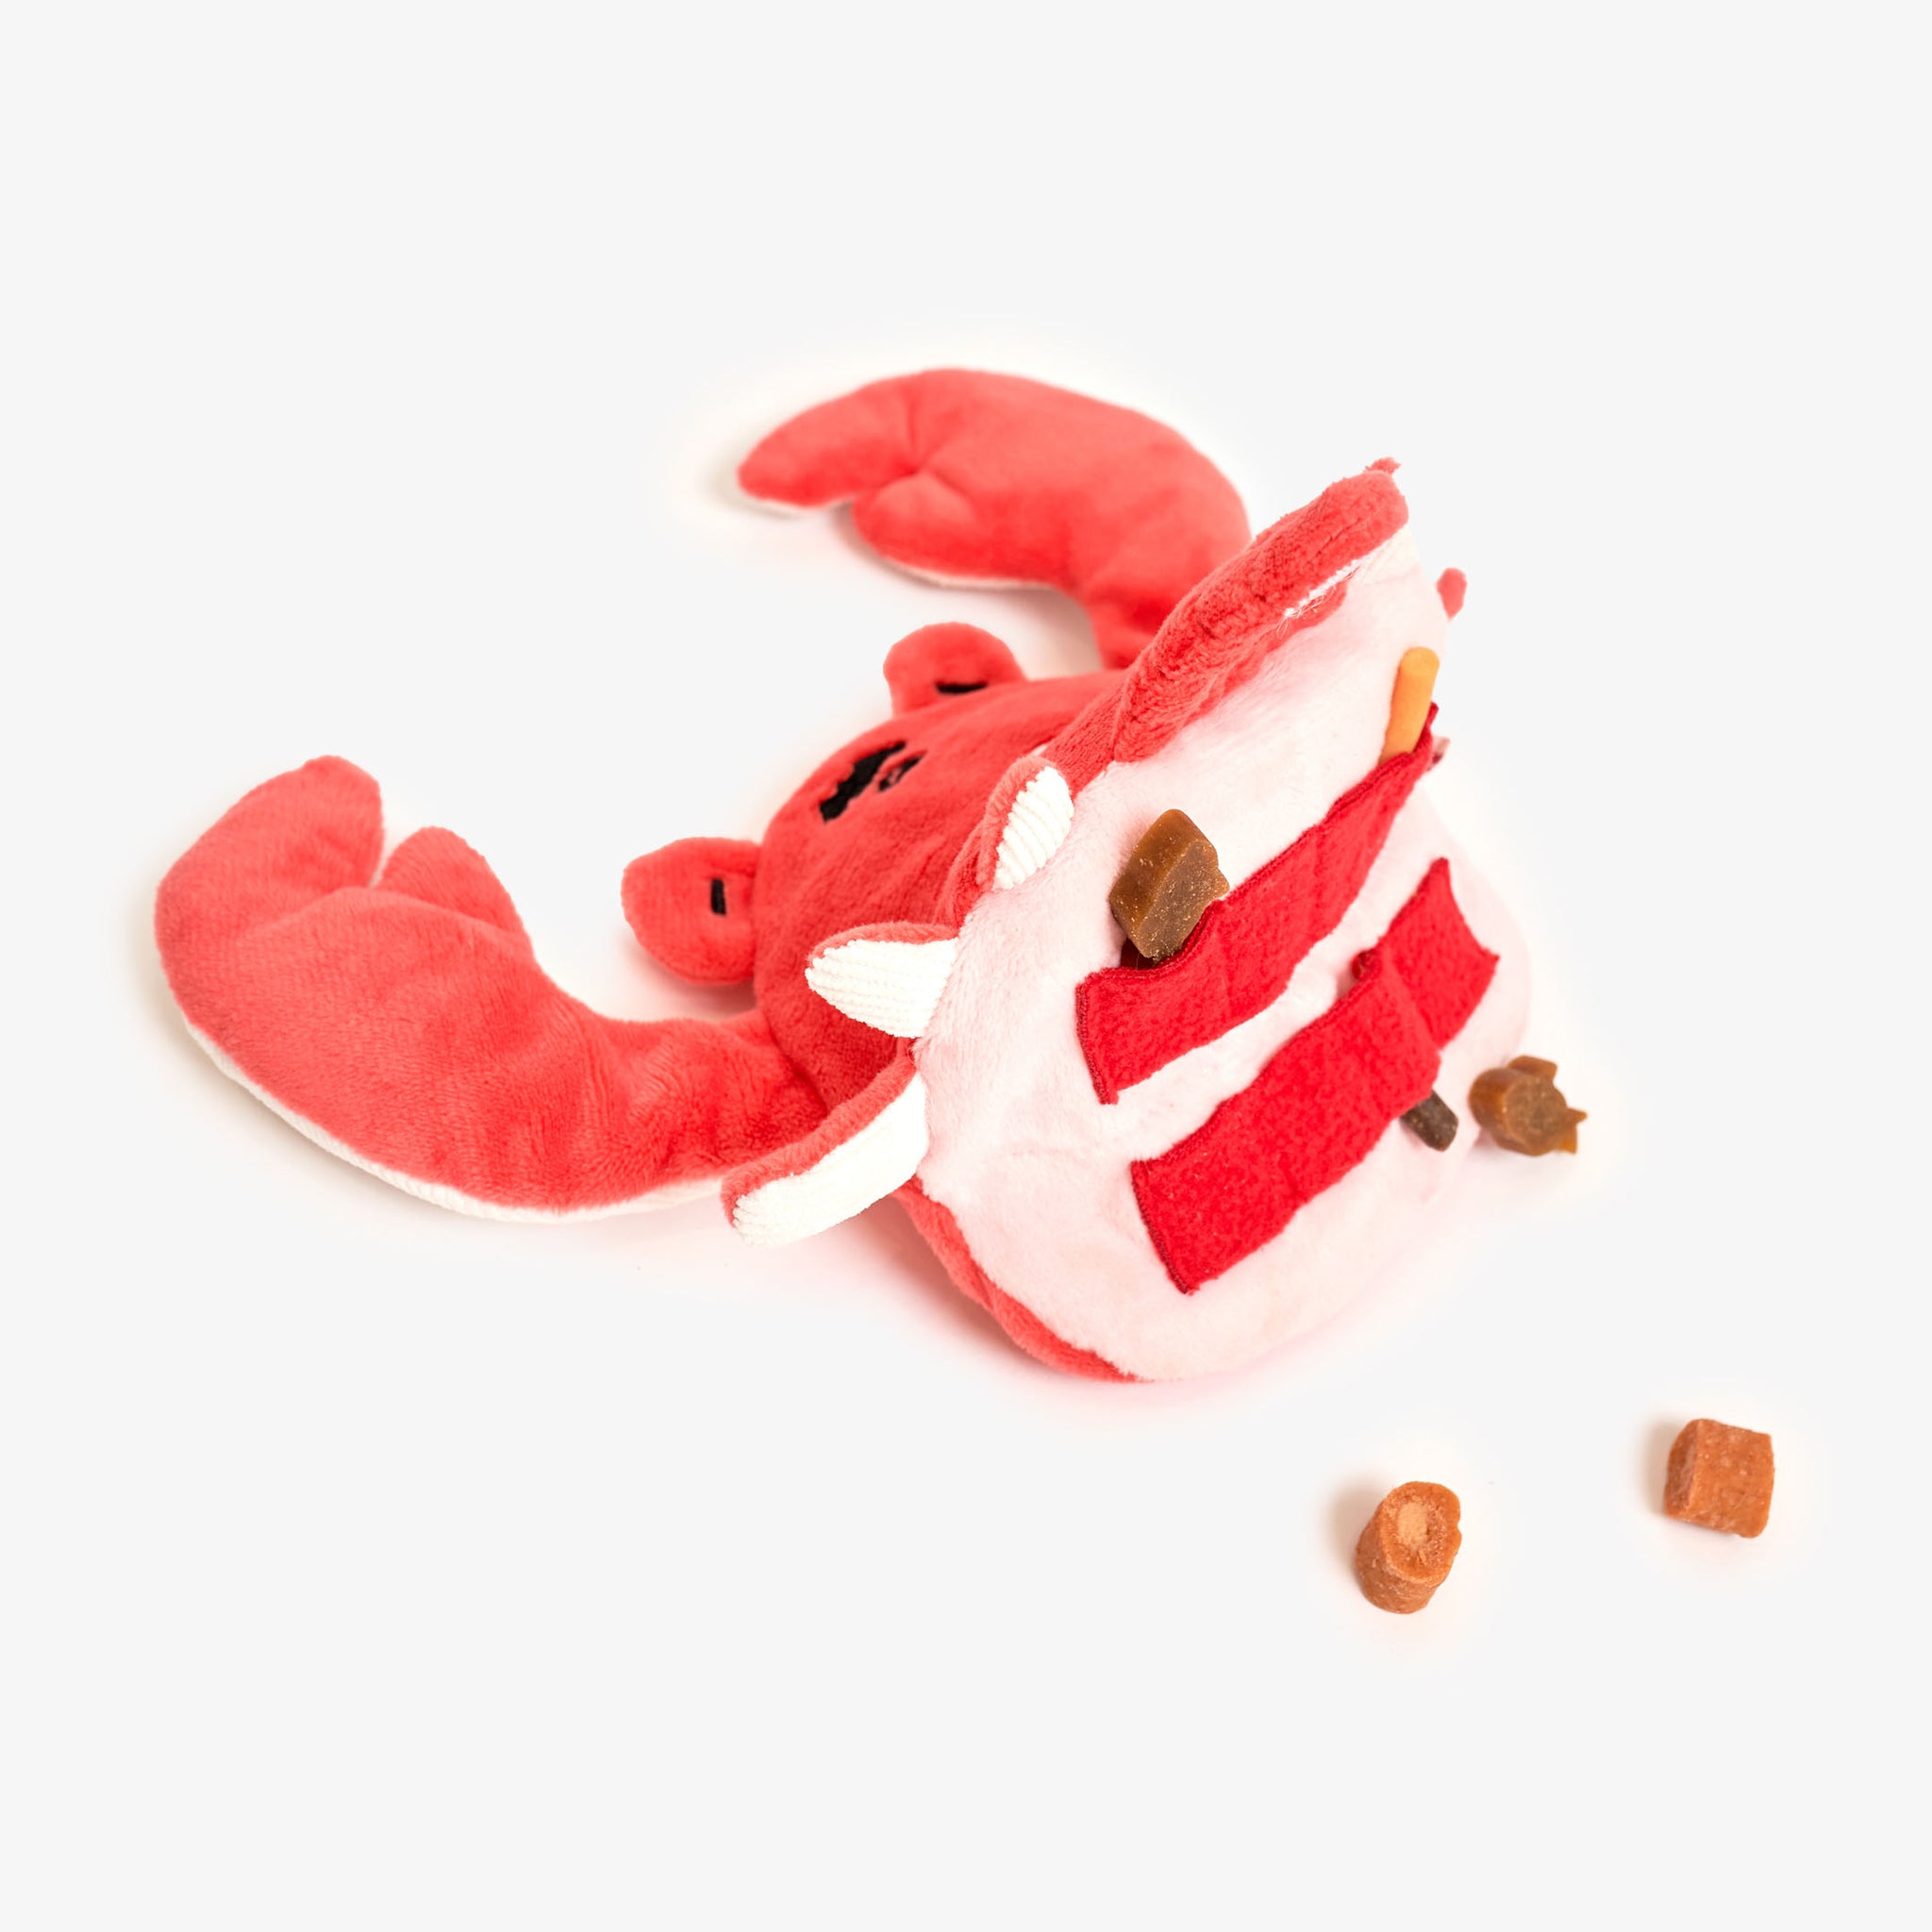 Uncle Crab Dog Enrichment Toy: Elevate Playtime for Your Furry Friend with Thoughtful Design.